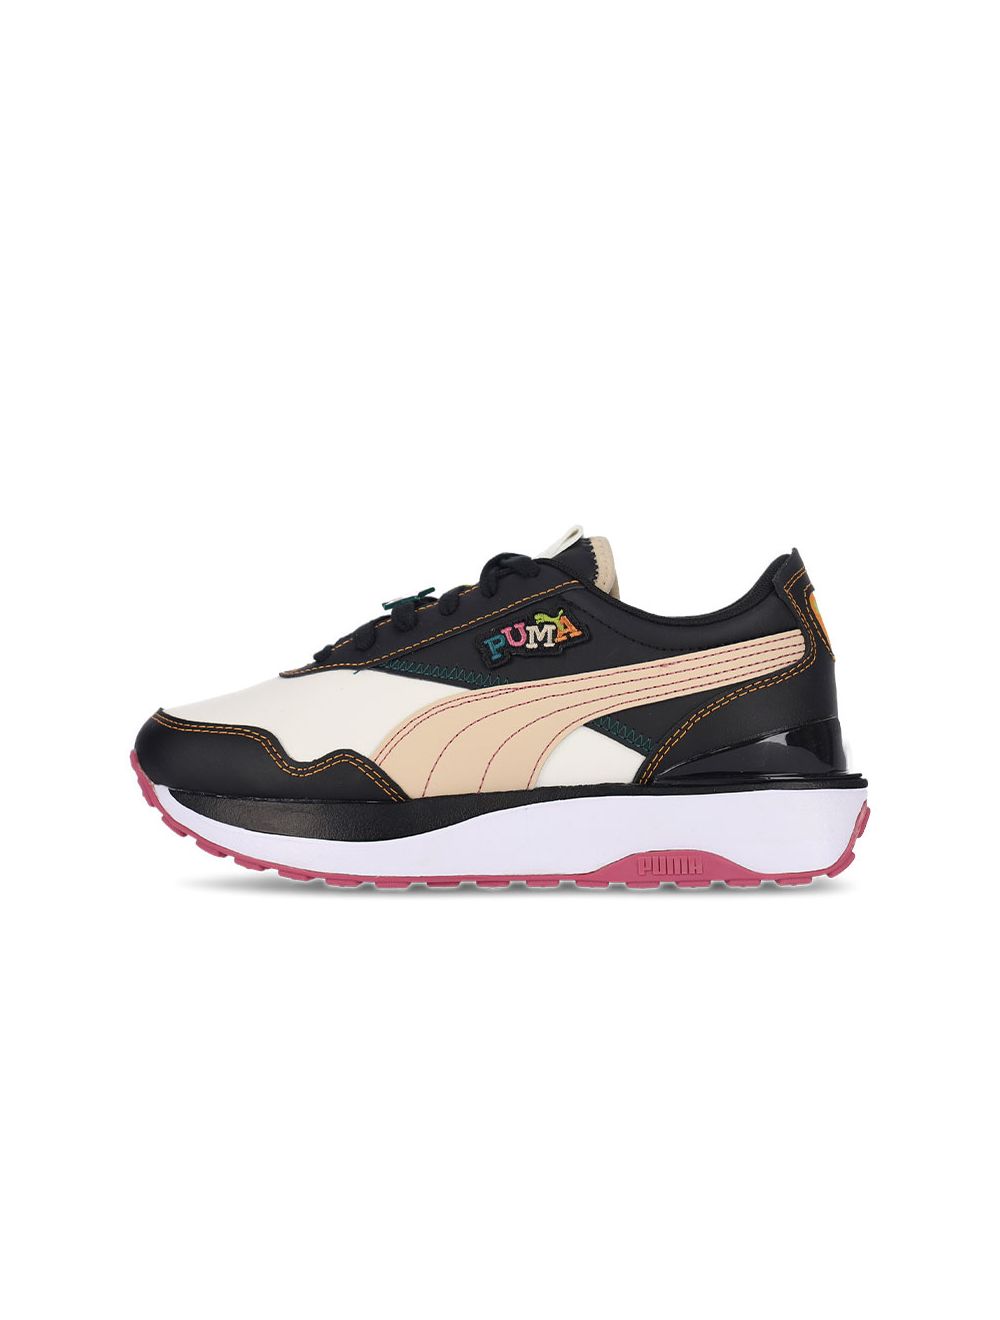 Ladies Puma up Sneakers - Californian-thephaco.com.vn